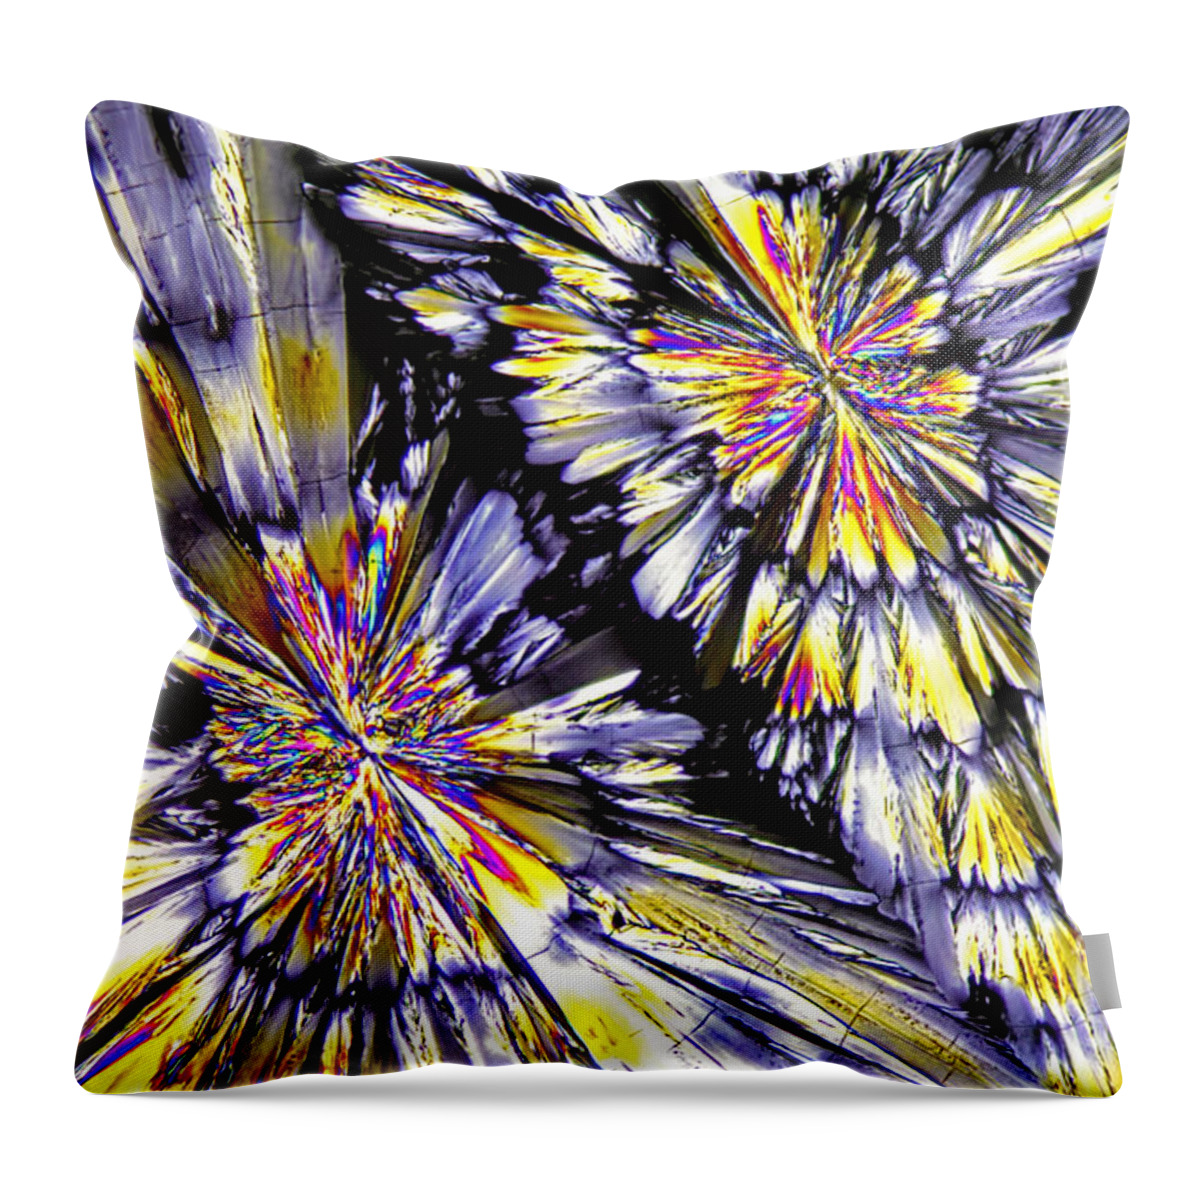 Ketamine Throw Pillow featuring the photograph Ketamine Crystals by M. I. Walker